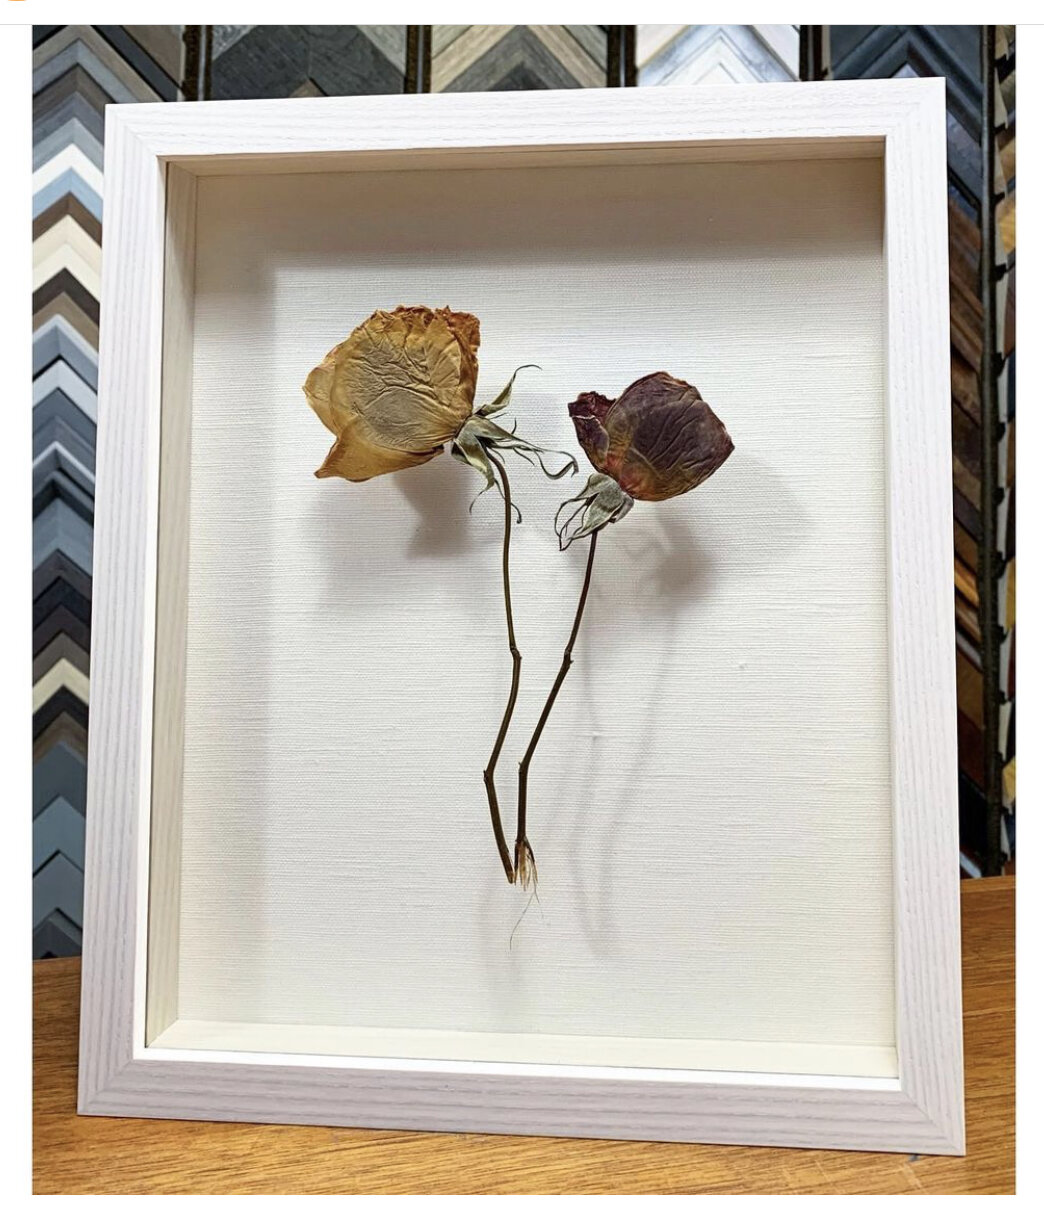 Underglass-Dried Flowers Framed After 35 Years Kept In A Book